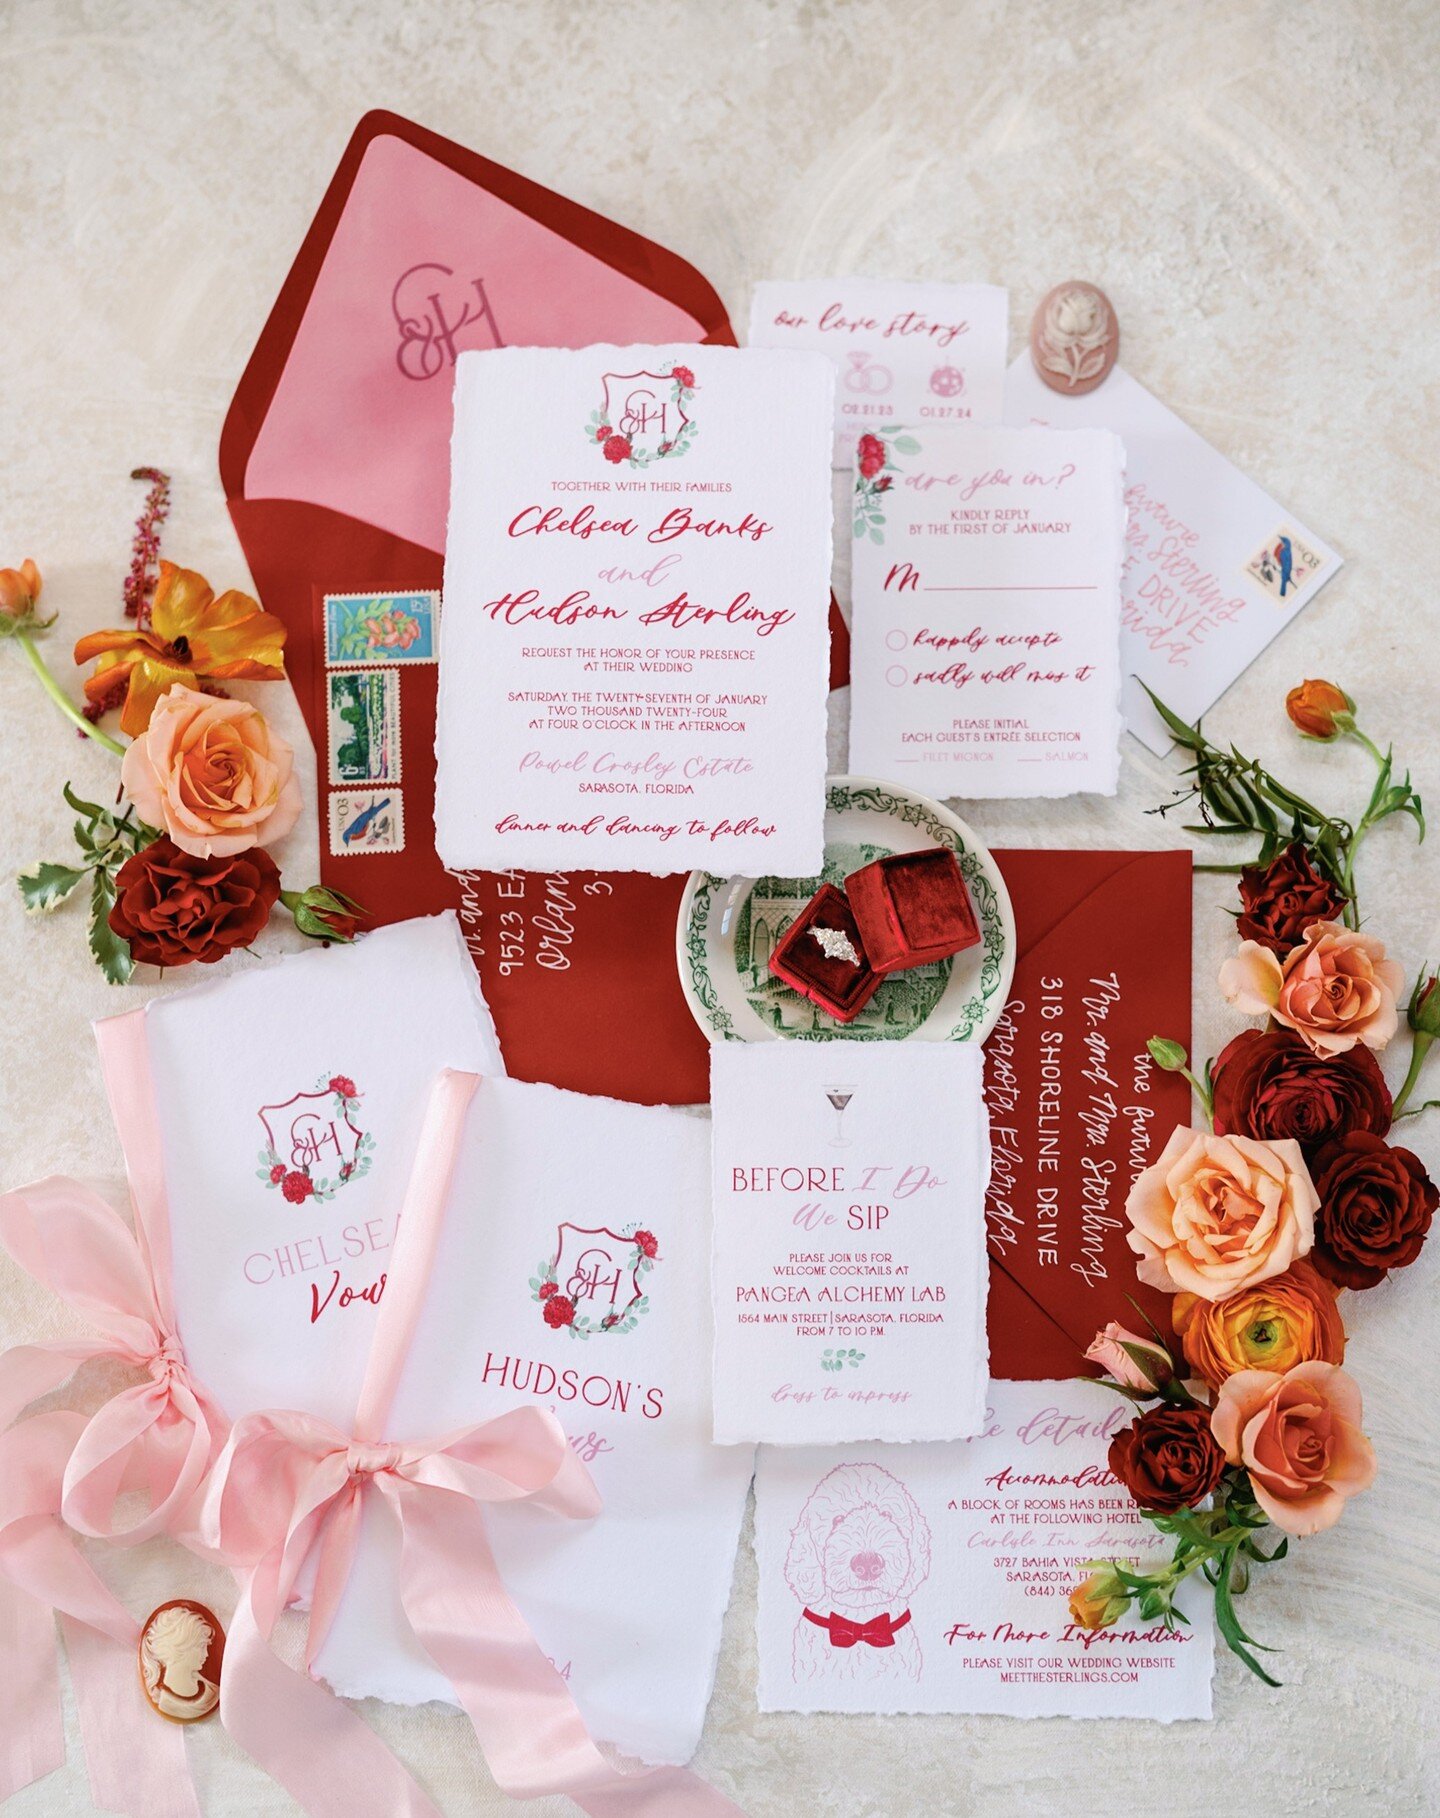 I love styled shoots for many reasons, but especially because I get to be creative in designing whatever I'd like while also experimenting with new ideas with the help of some talented friends! I've always wanted to work with handmade paper, so I rea